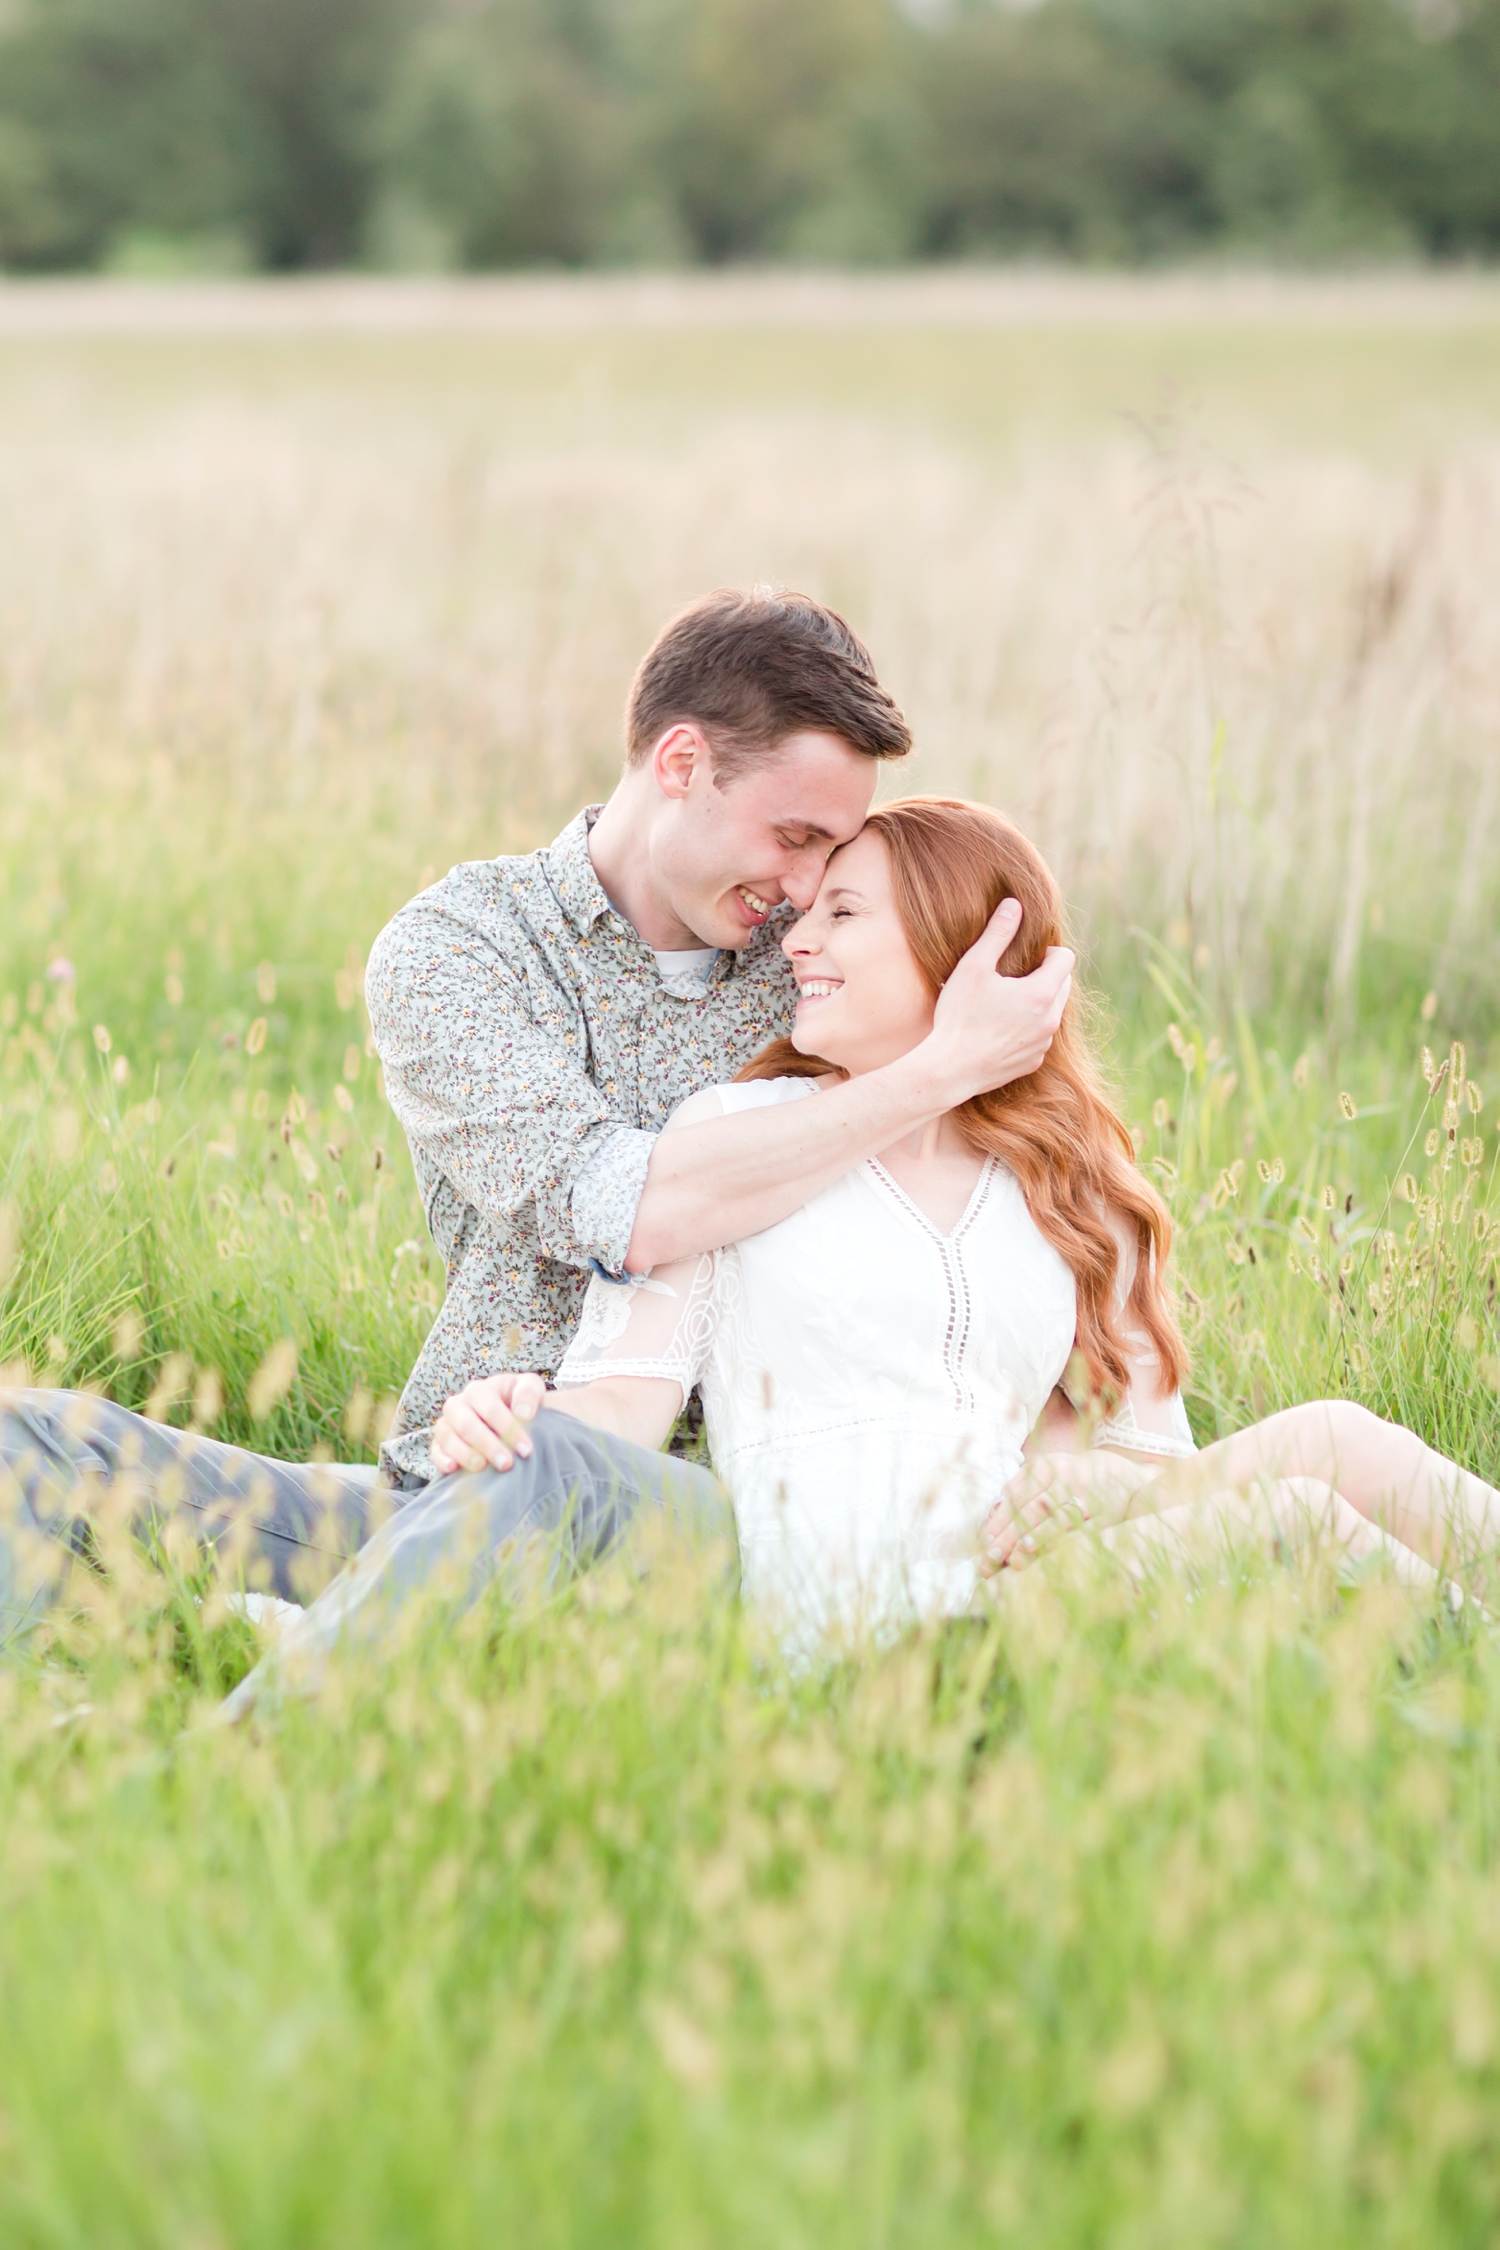  See more from   Leo and Jessica’s engagement session at the Maryland Agricultural Resource Council here  ! 